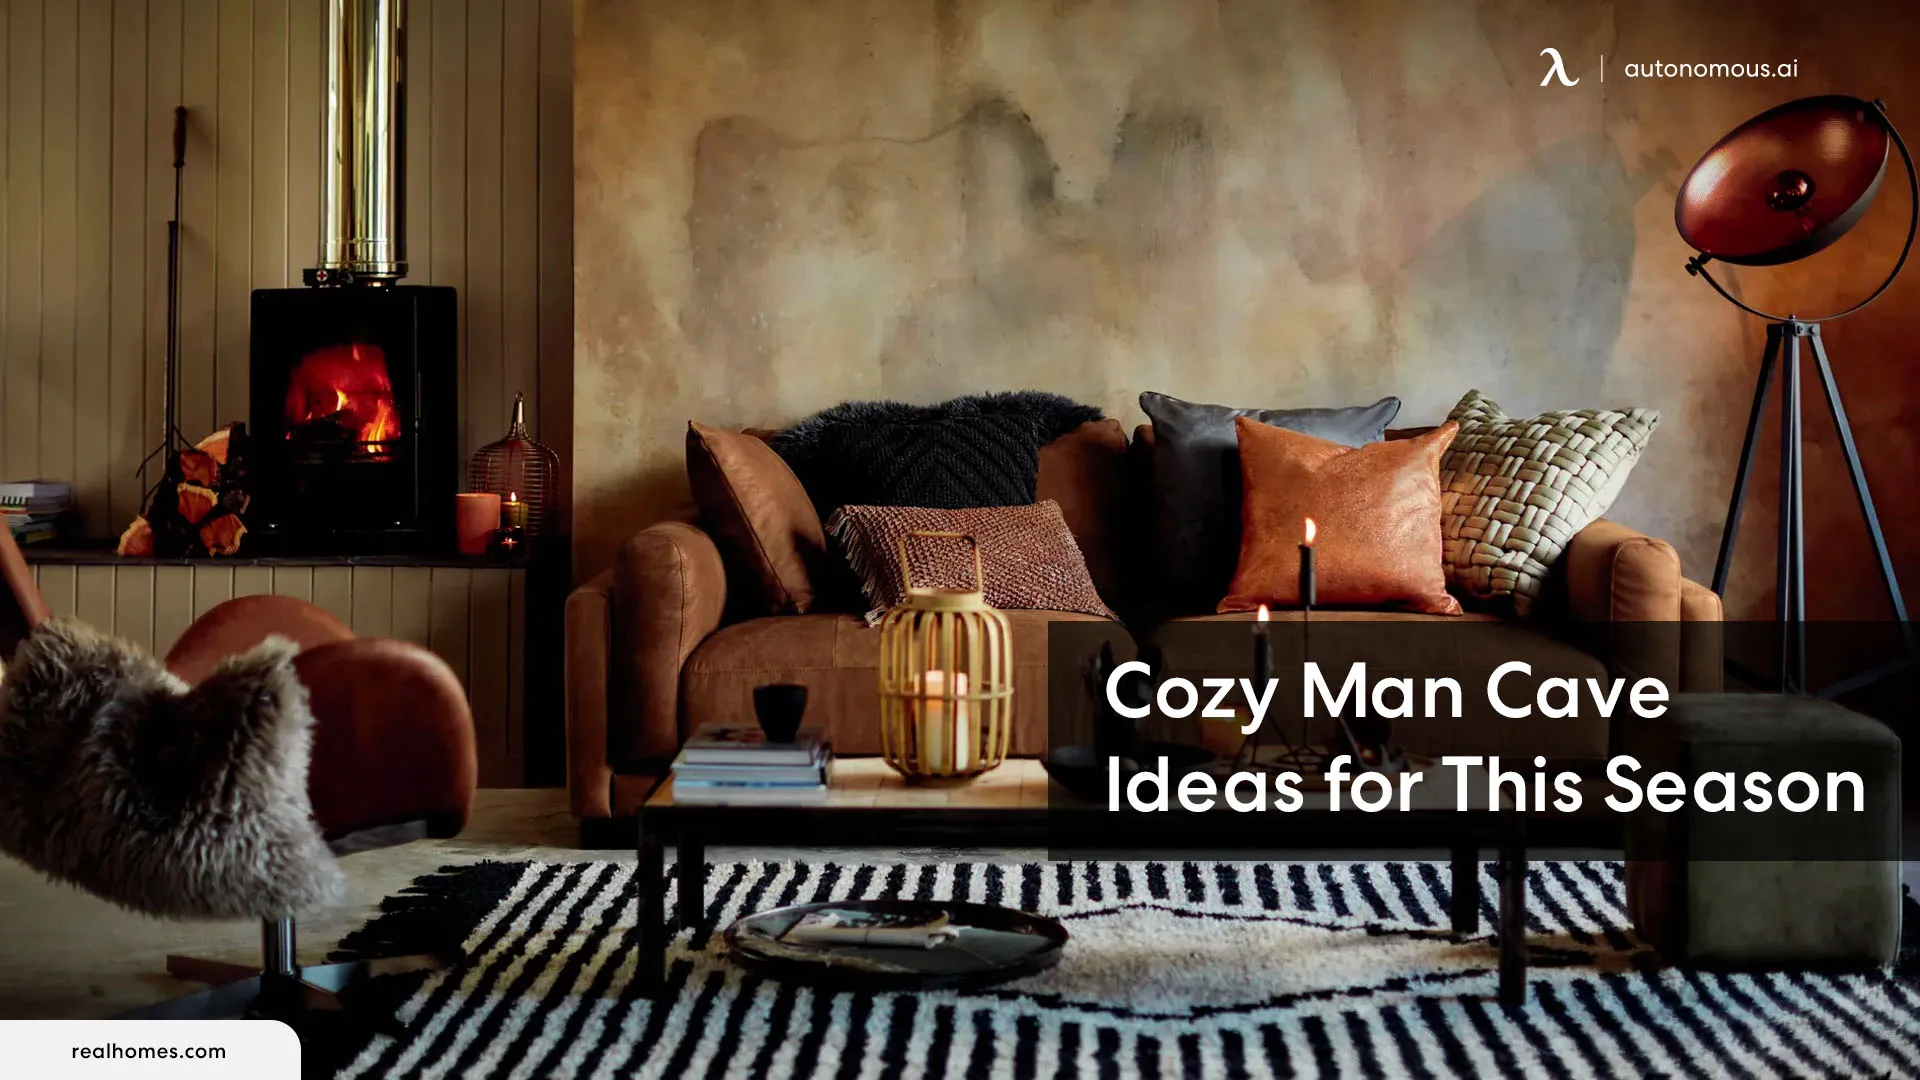 Inspiring Cozy Man Cave Ideas for This Winter